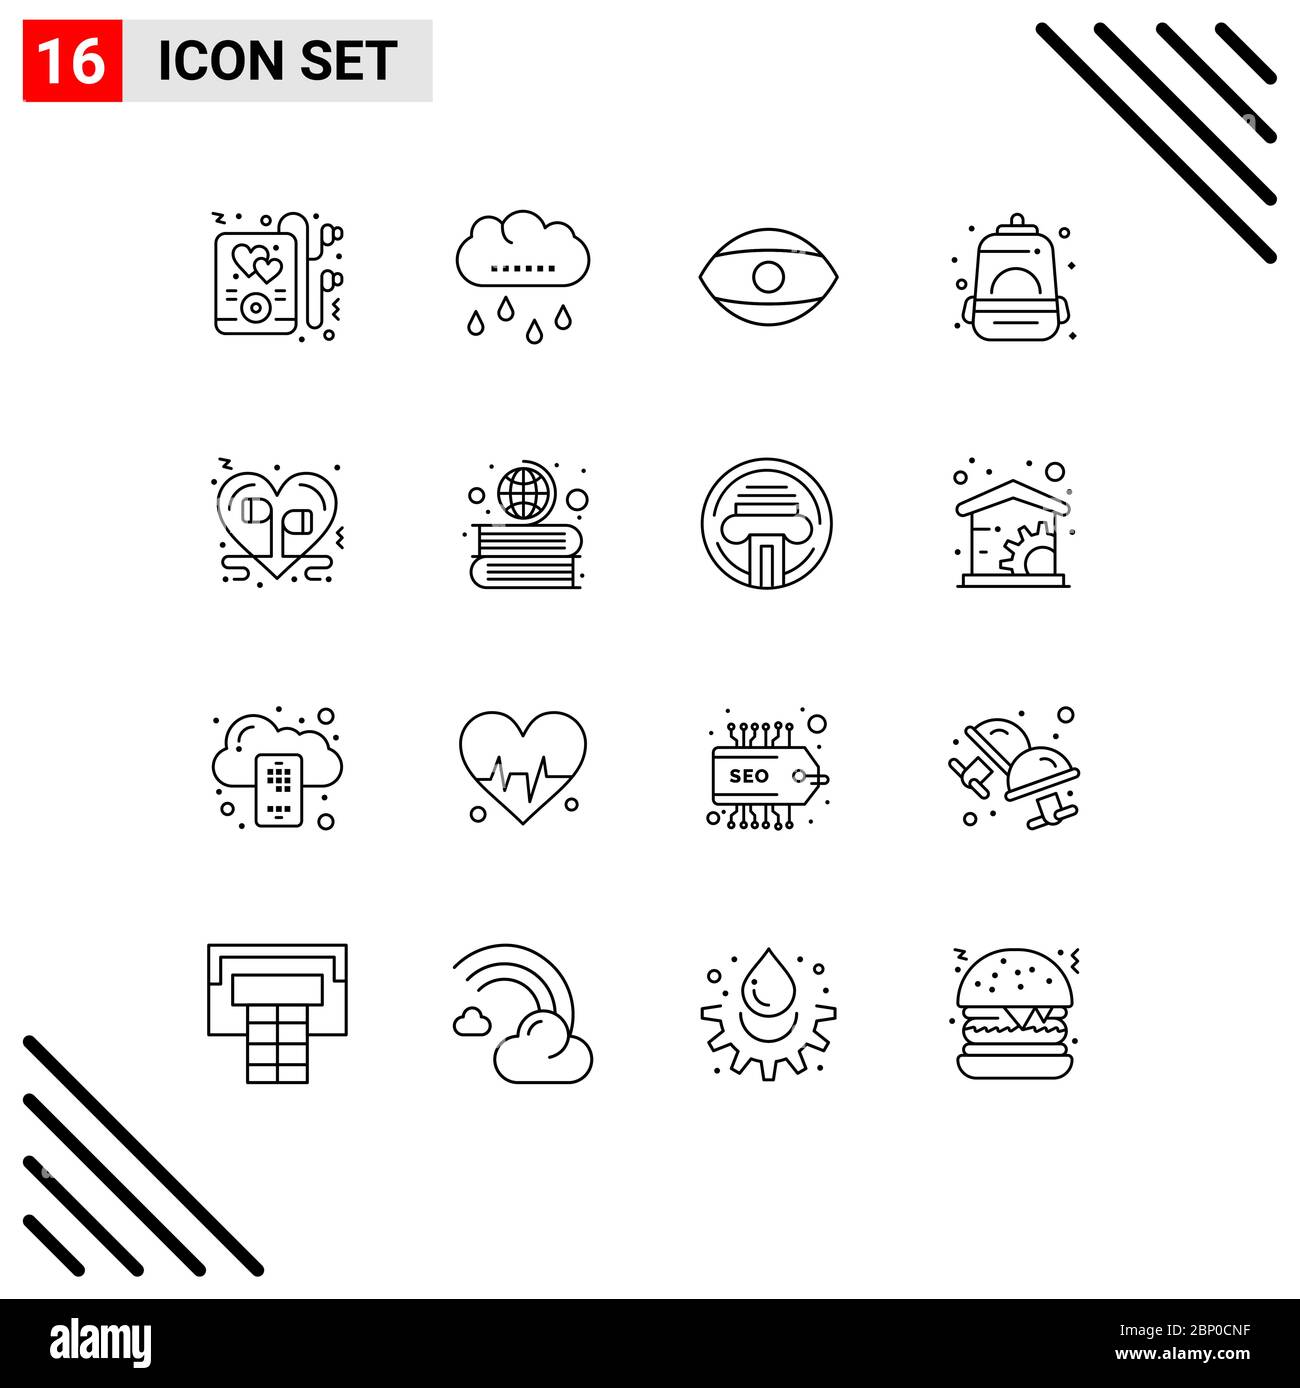 User Interface Pack of 16 Basic Outlines of love, headphone, face, school, bag Editable Vector Design Elements Stock Vector